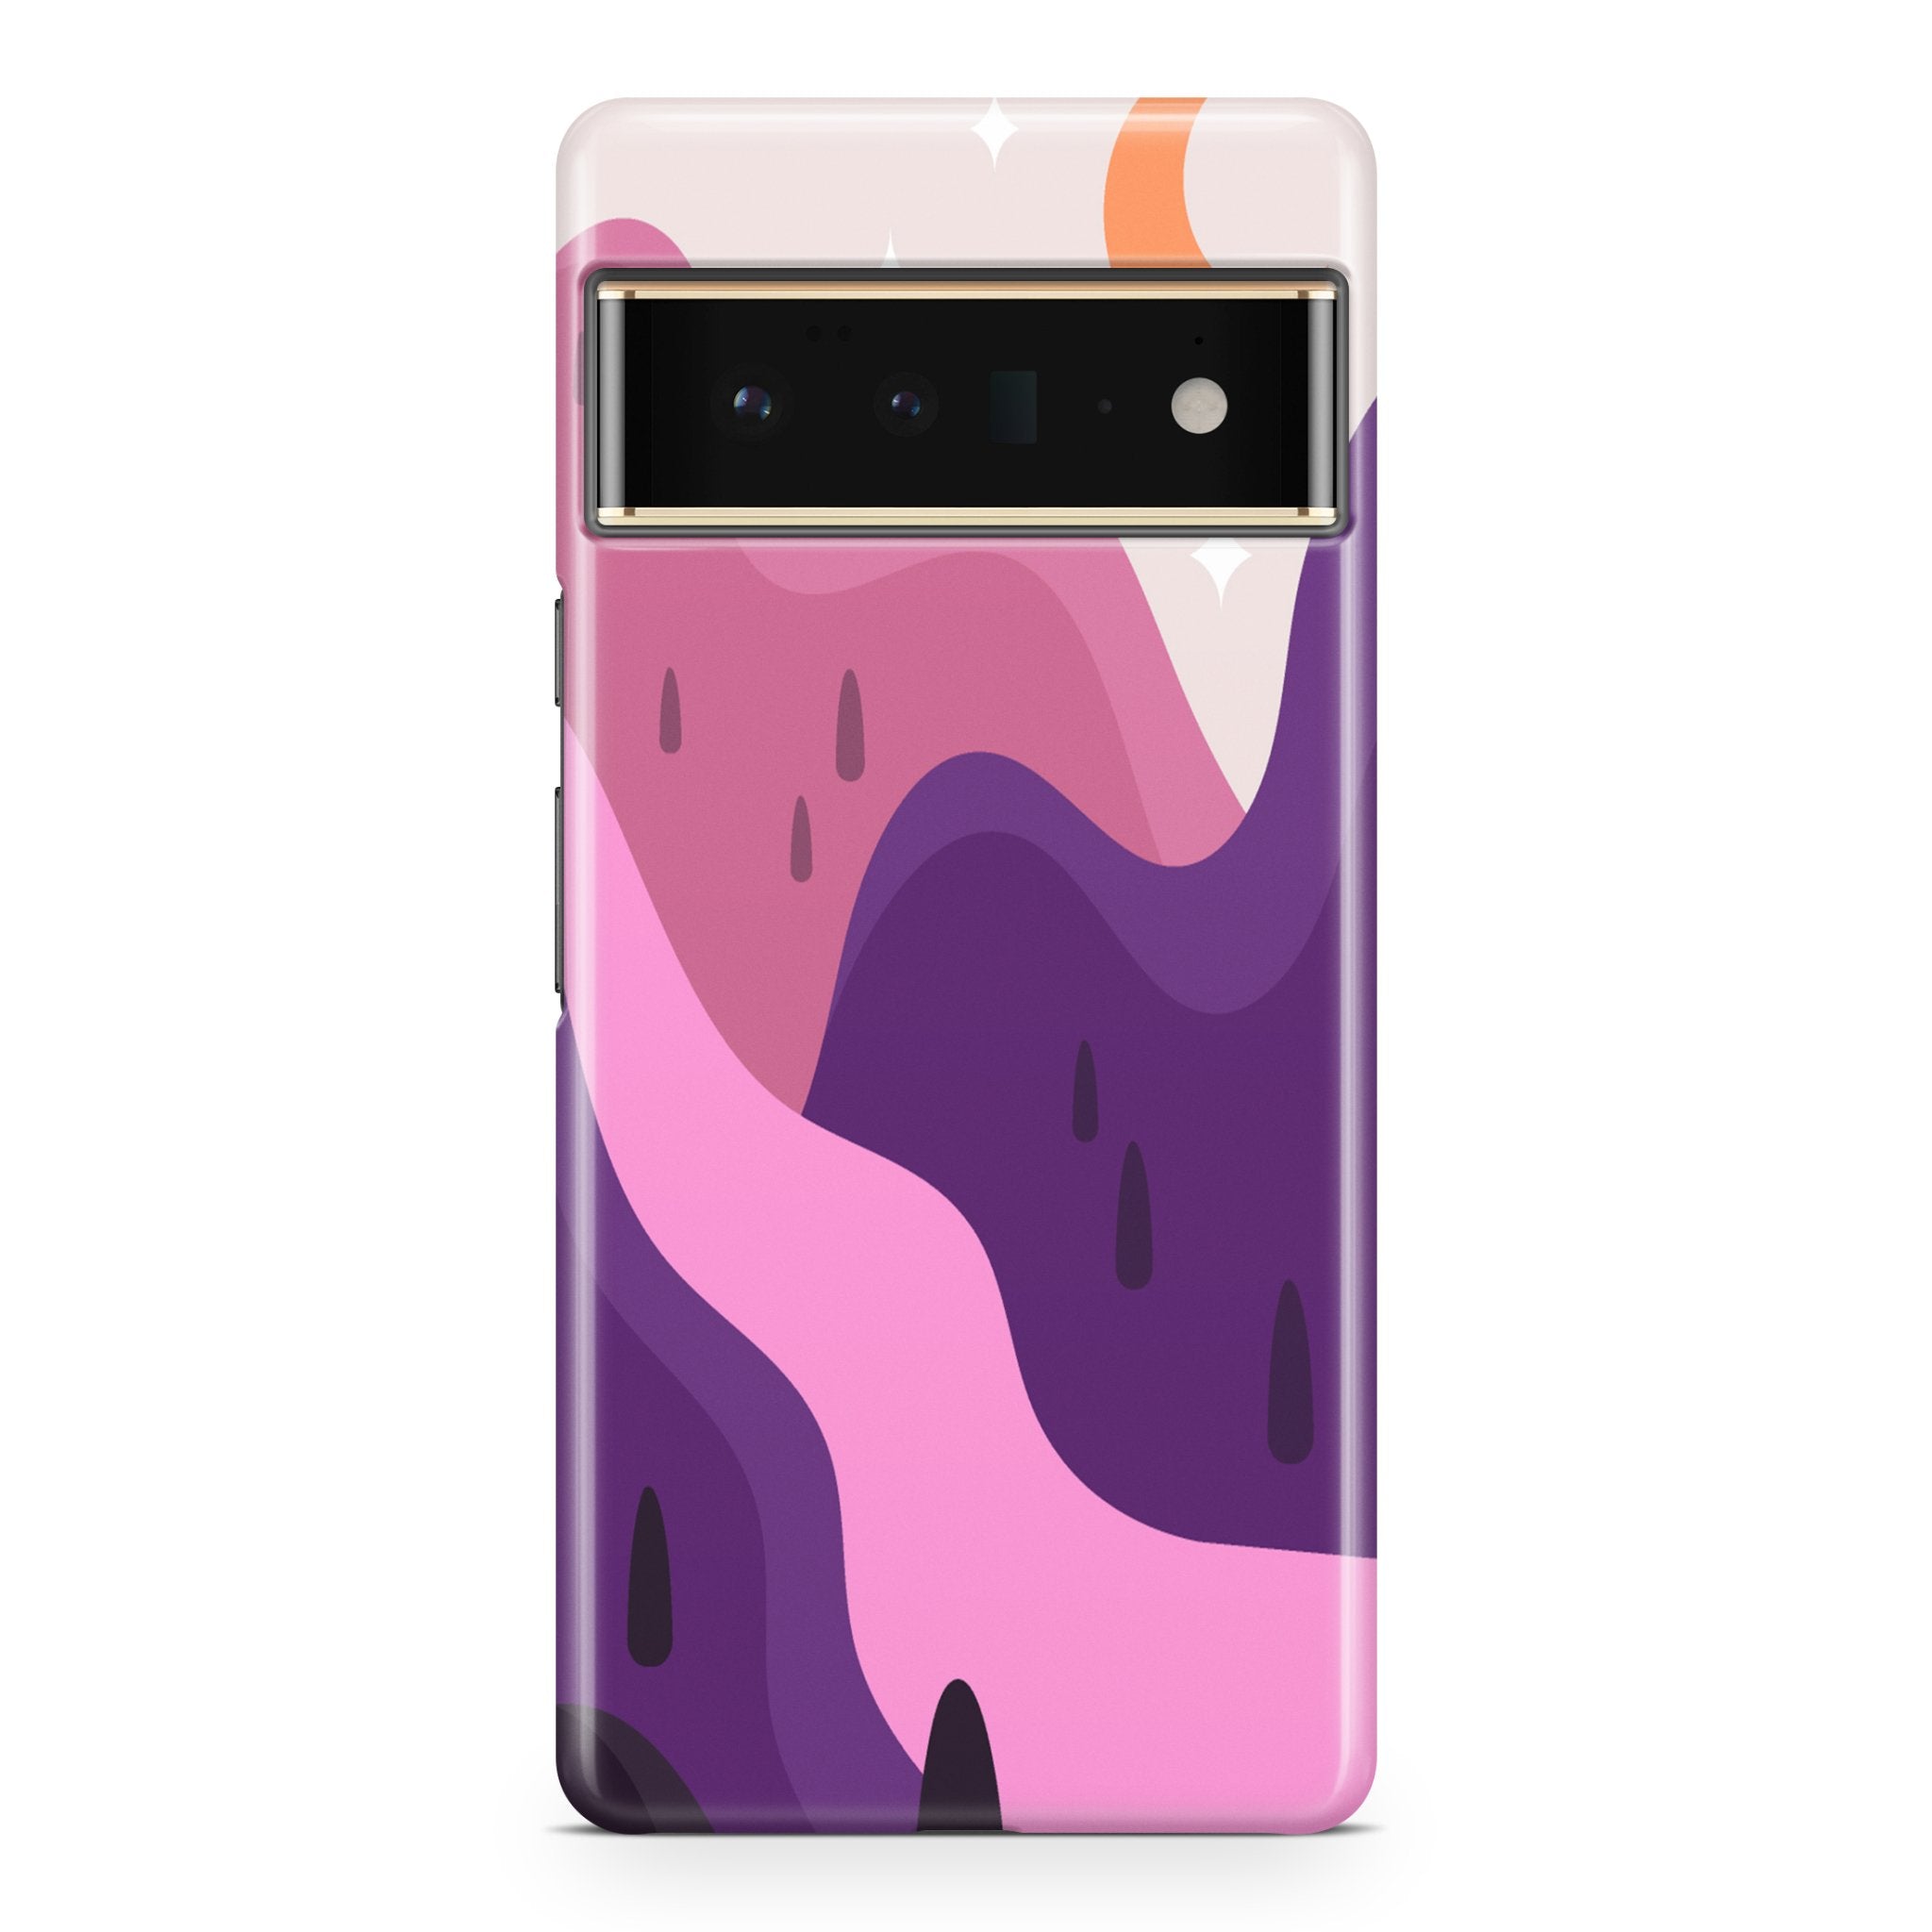 Simple Landscape V - Google phone case designs by CaseSwagger